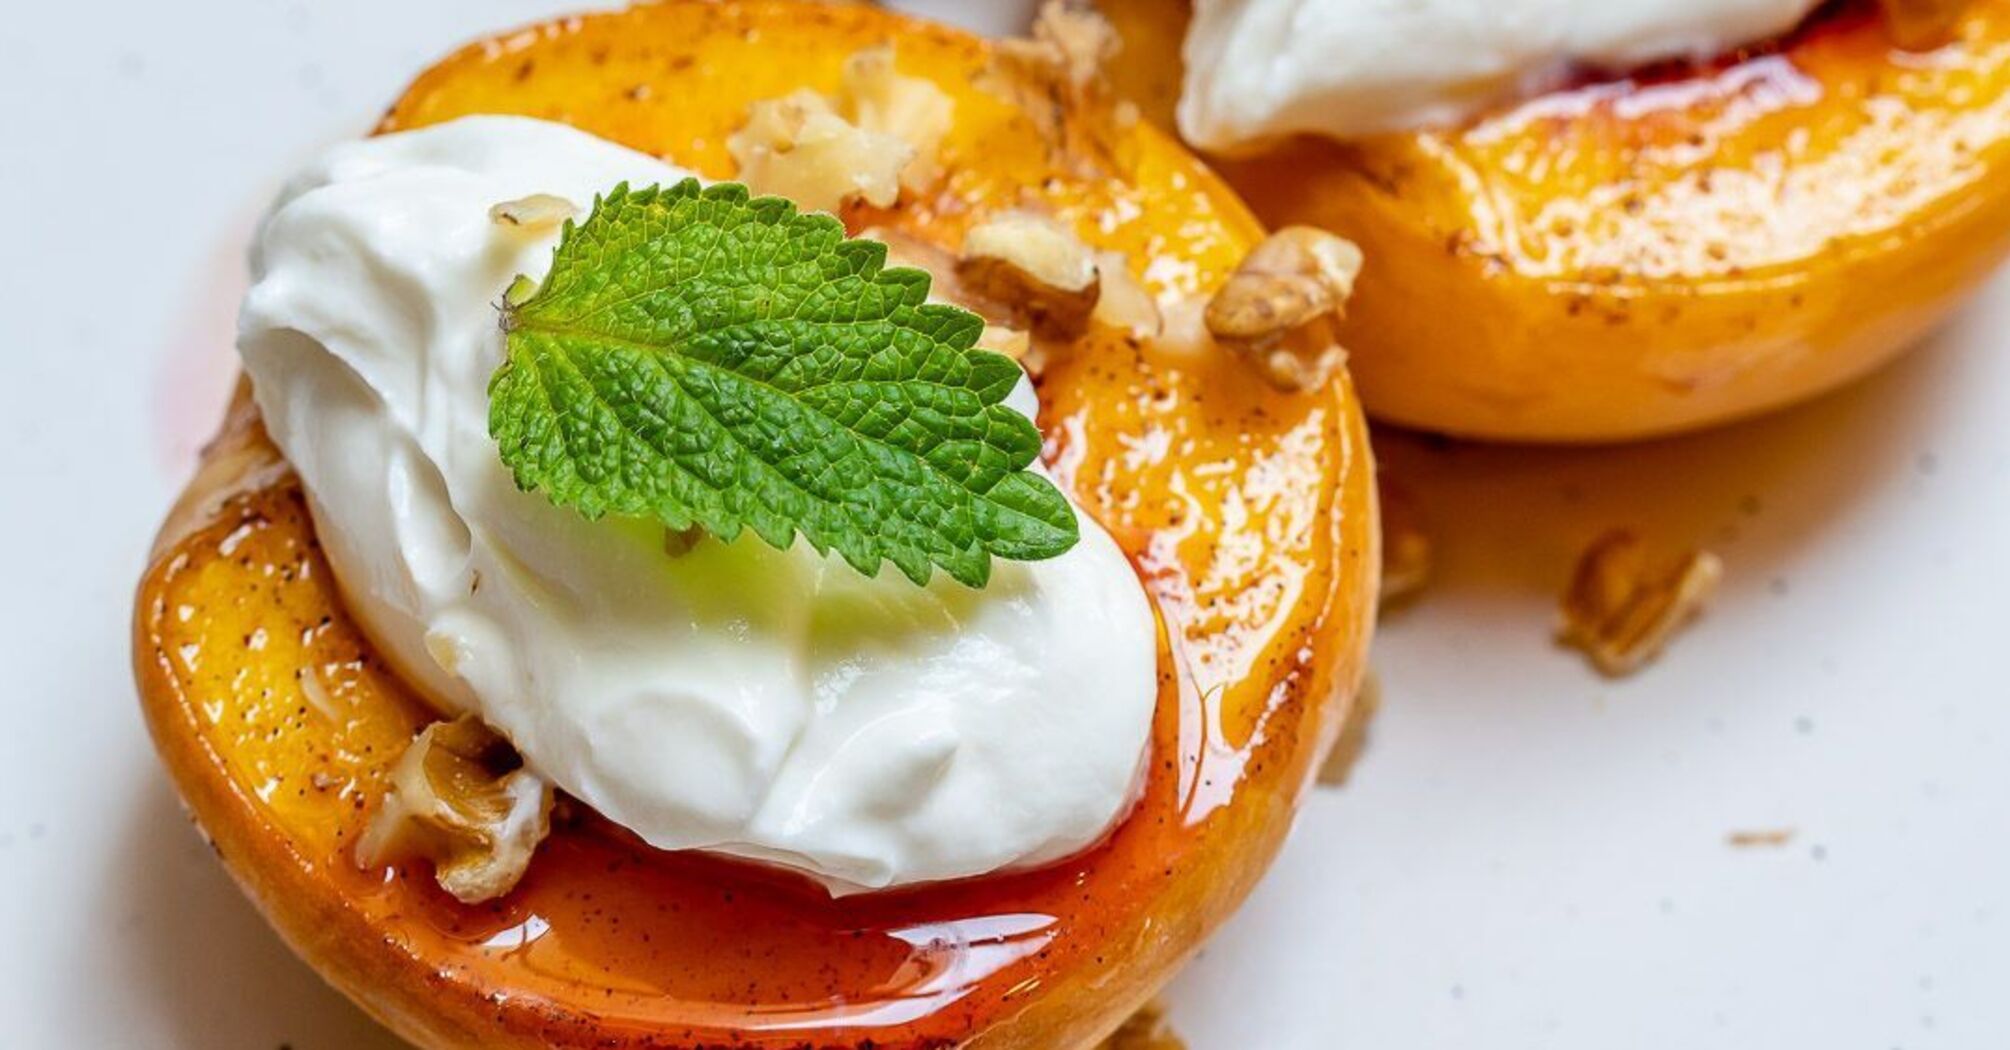 No dough and no baking: peach dessert with ice cream and nuts